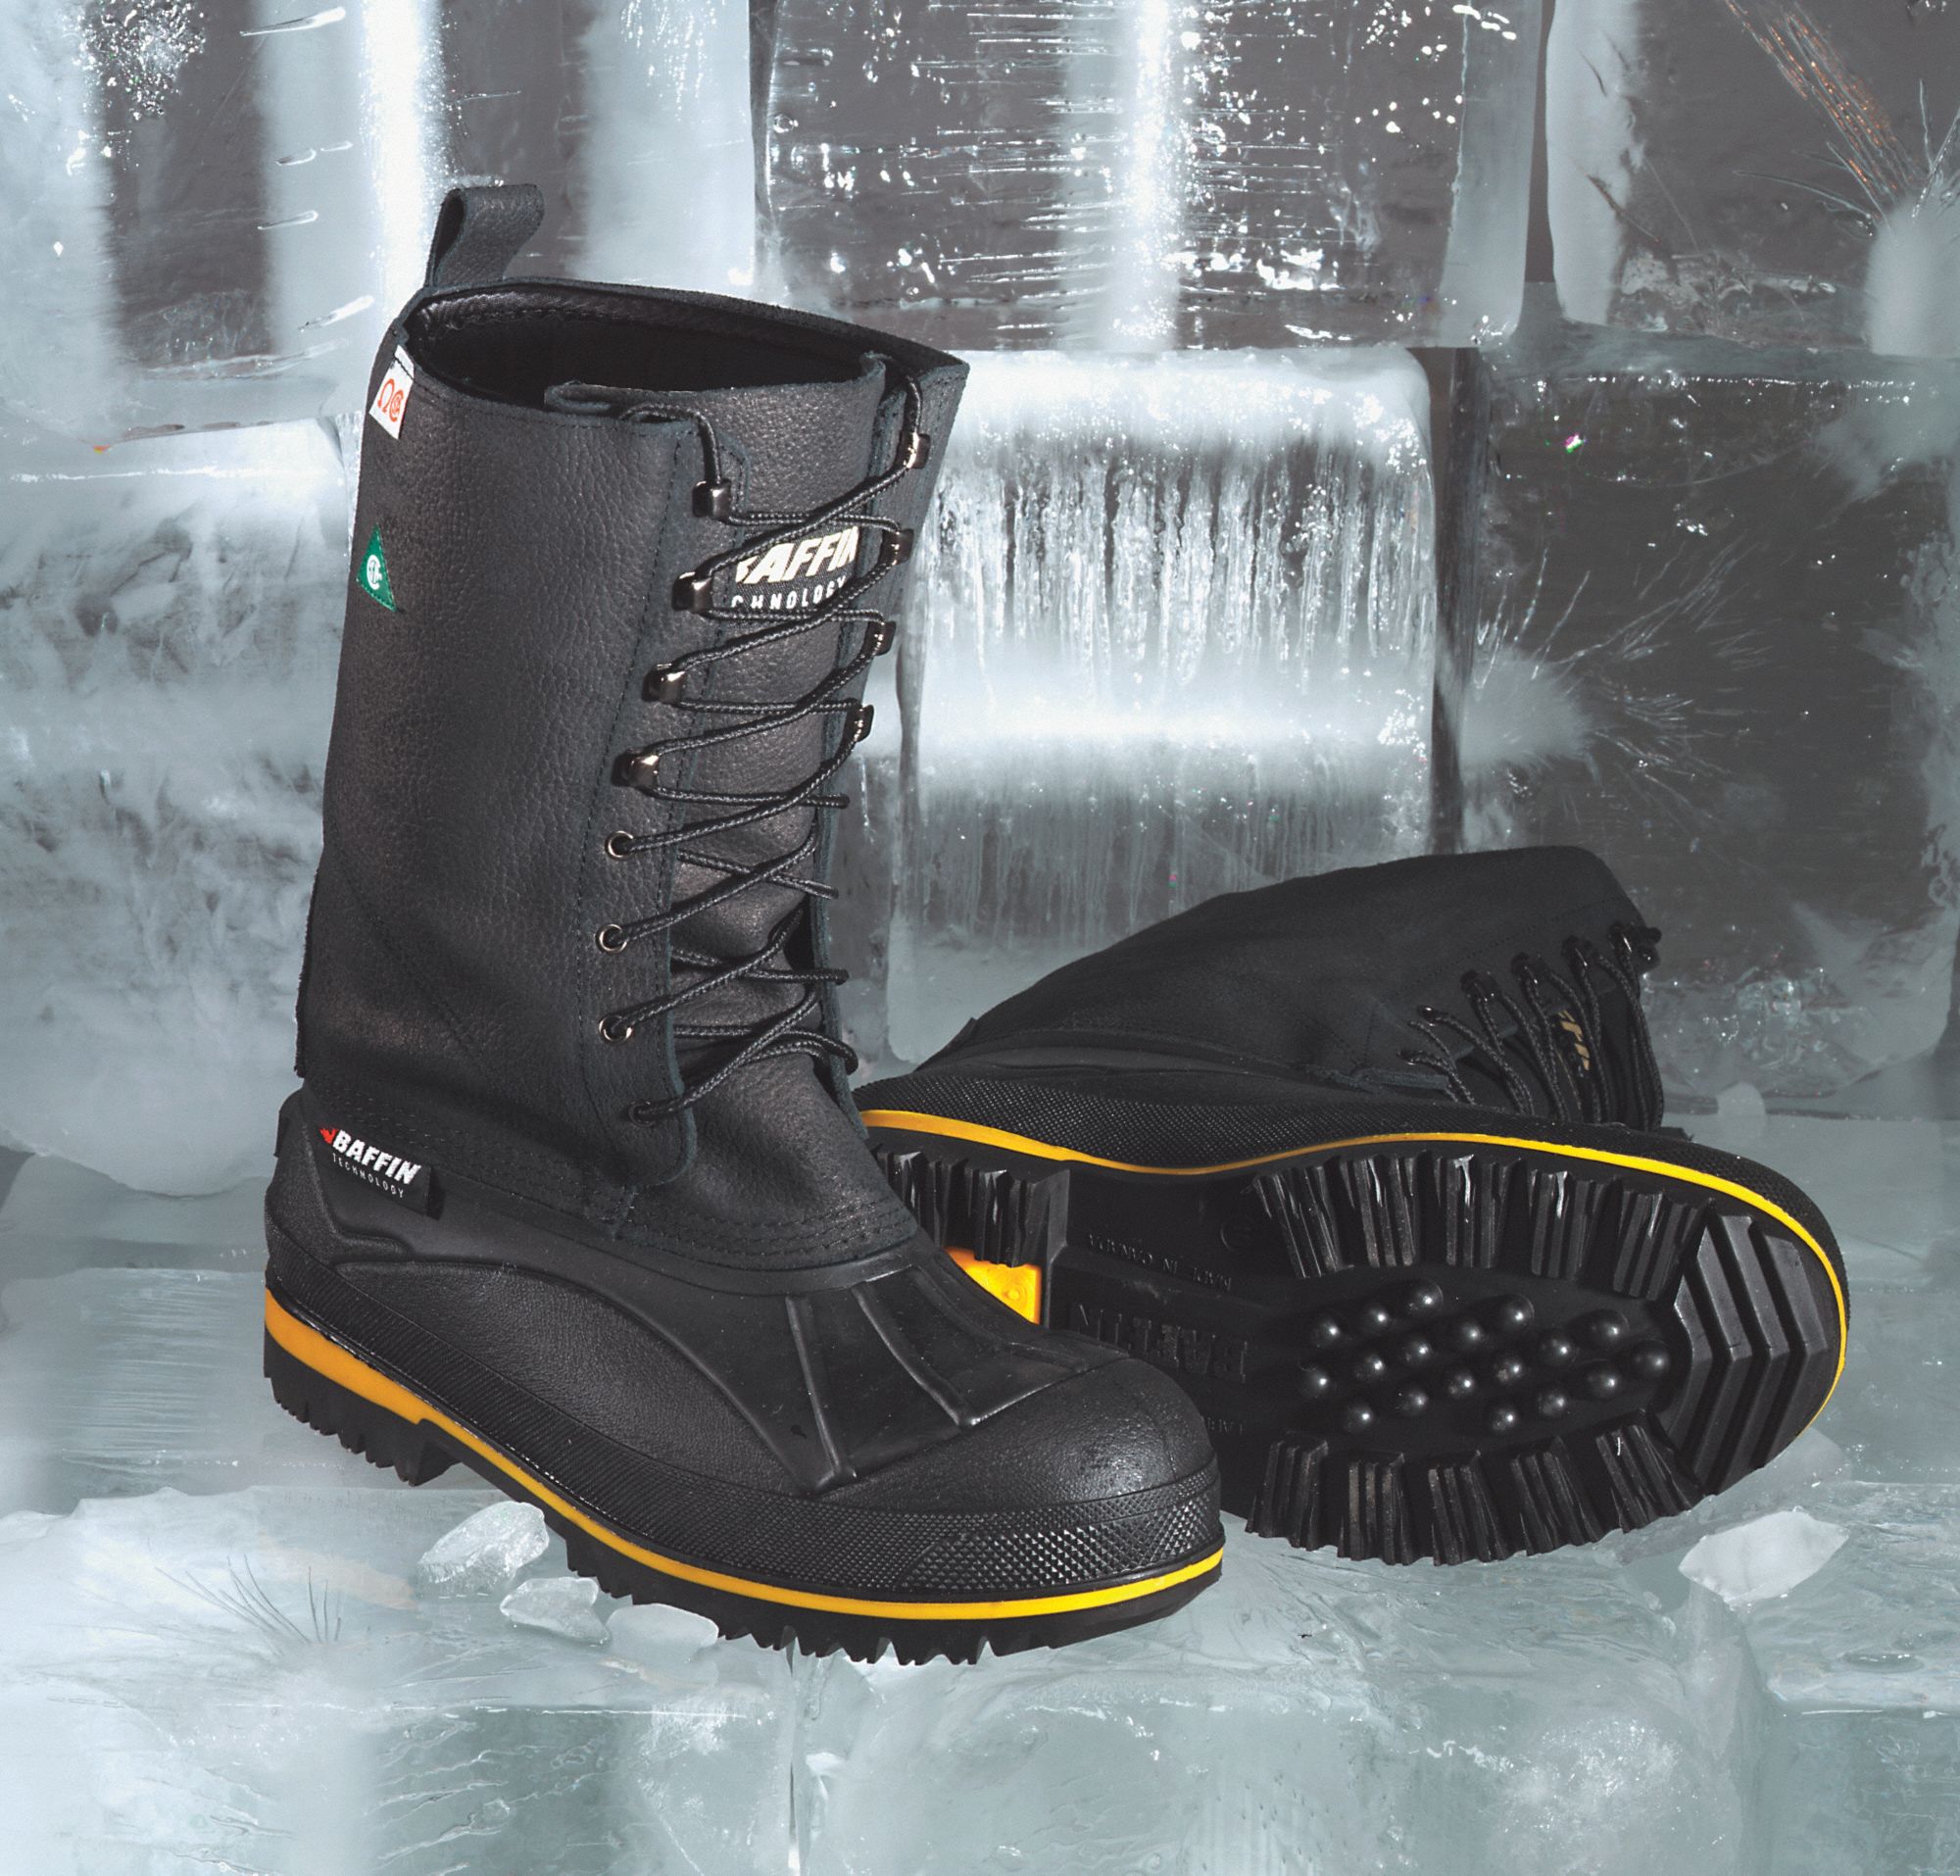 snow work boots mens